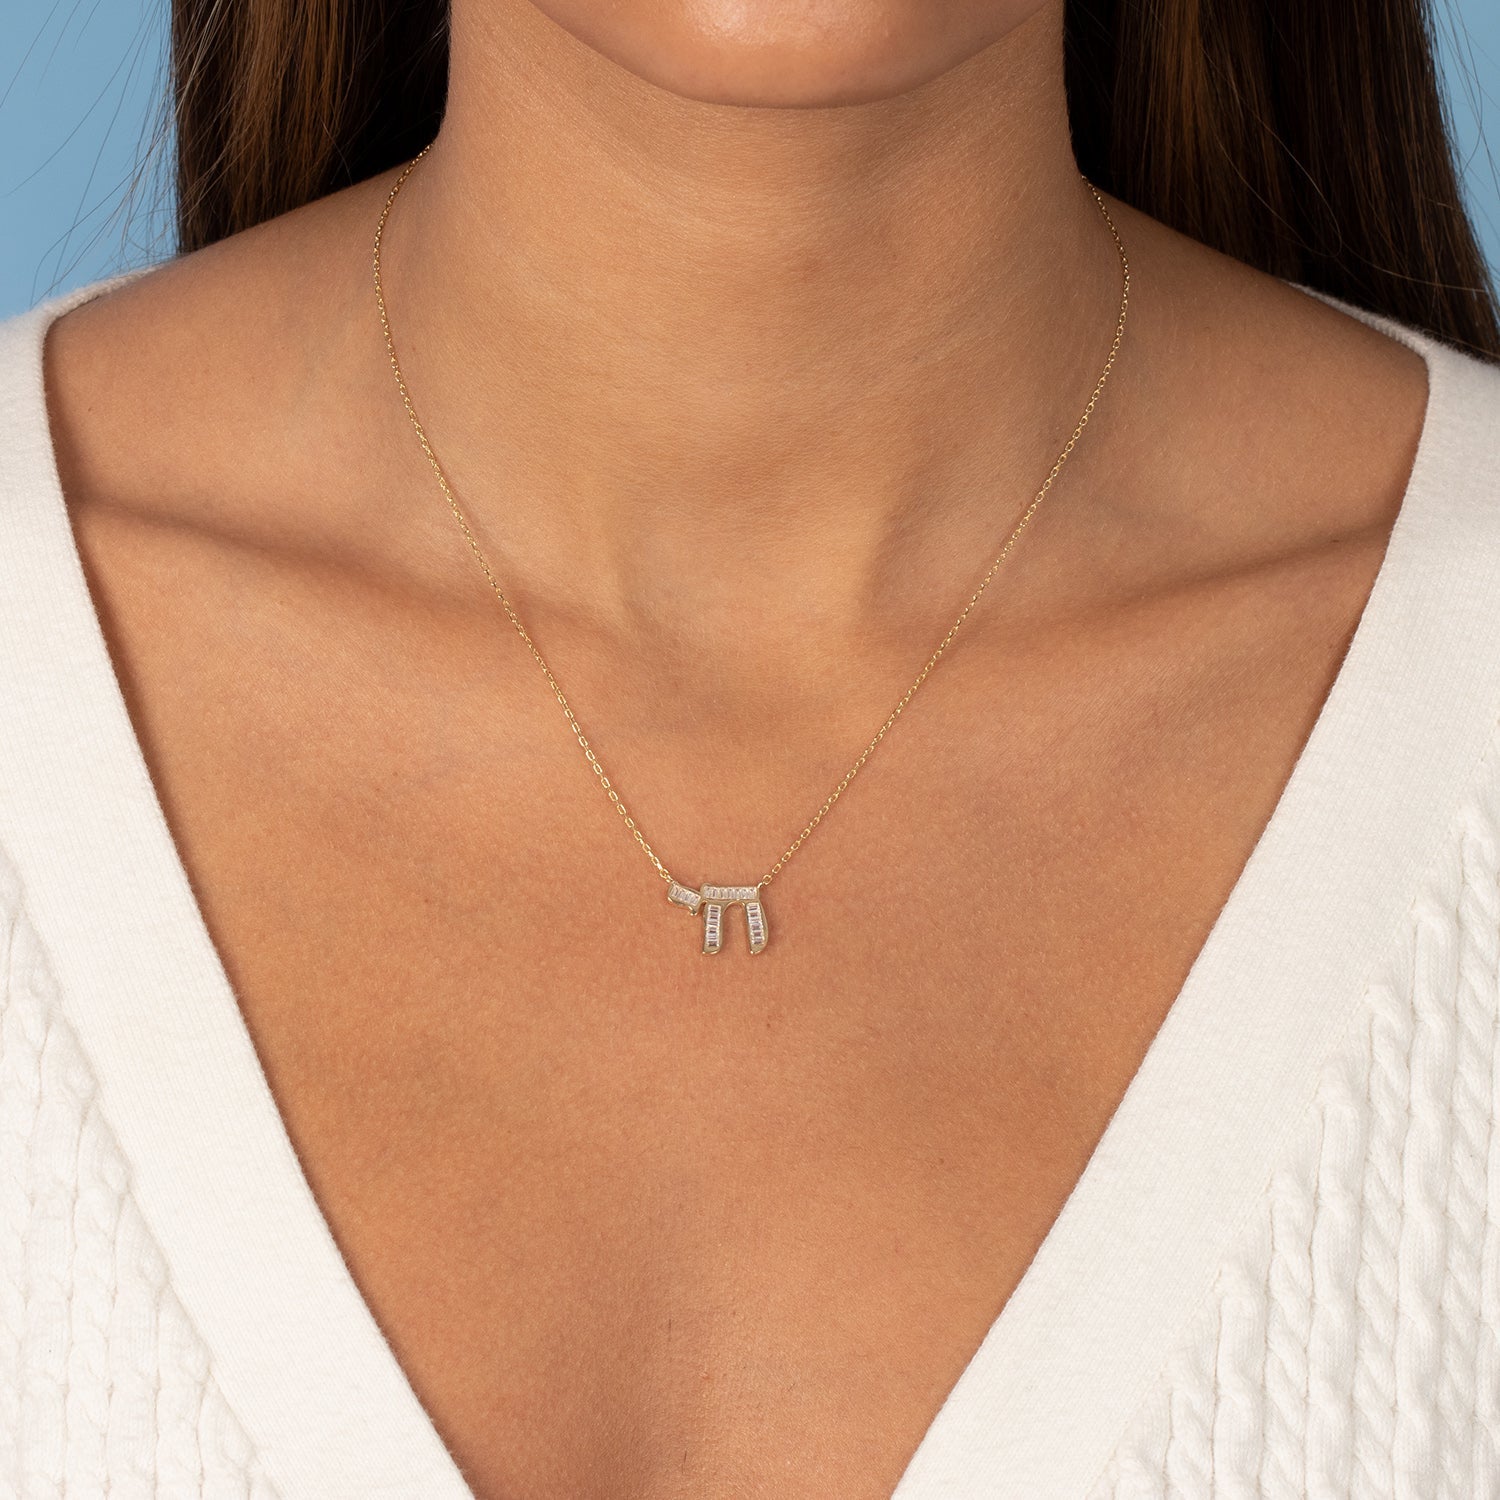 A close-up showcases a person wearing the delicately crafted Baguette Chai Pendant Necklace by Adina Eden. This exquisite piece features three vertical bars, each adorned with sparkling clear baguette CZ stones, all set in thin, yellow gold. The individual is dressed in a white v-neck knit sweater, and their straight brown hair cascades slightly against a light blue background.